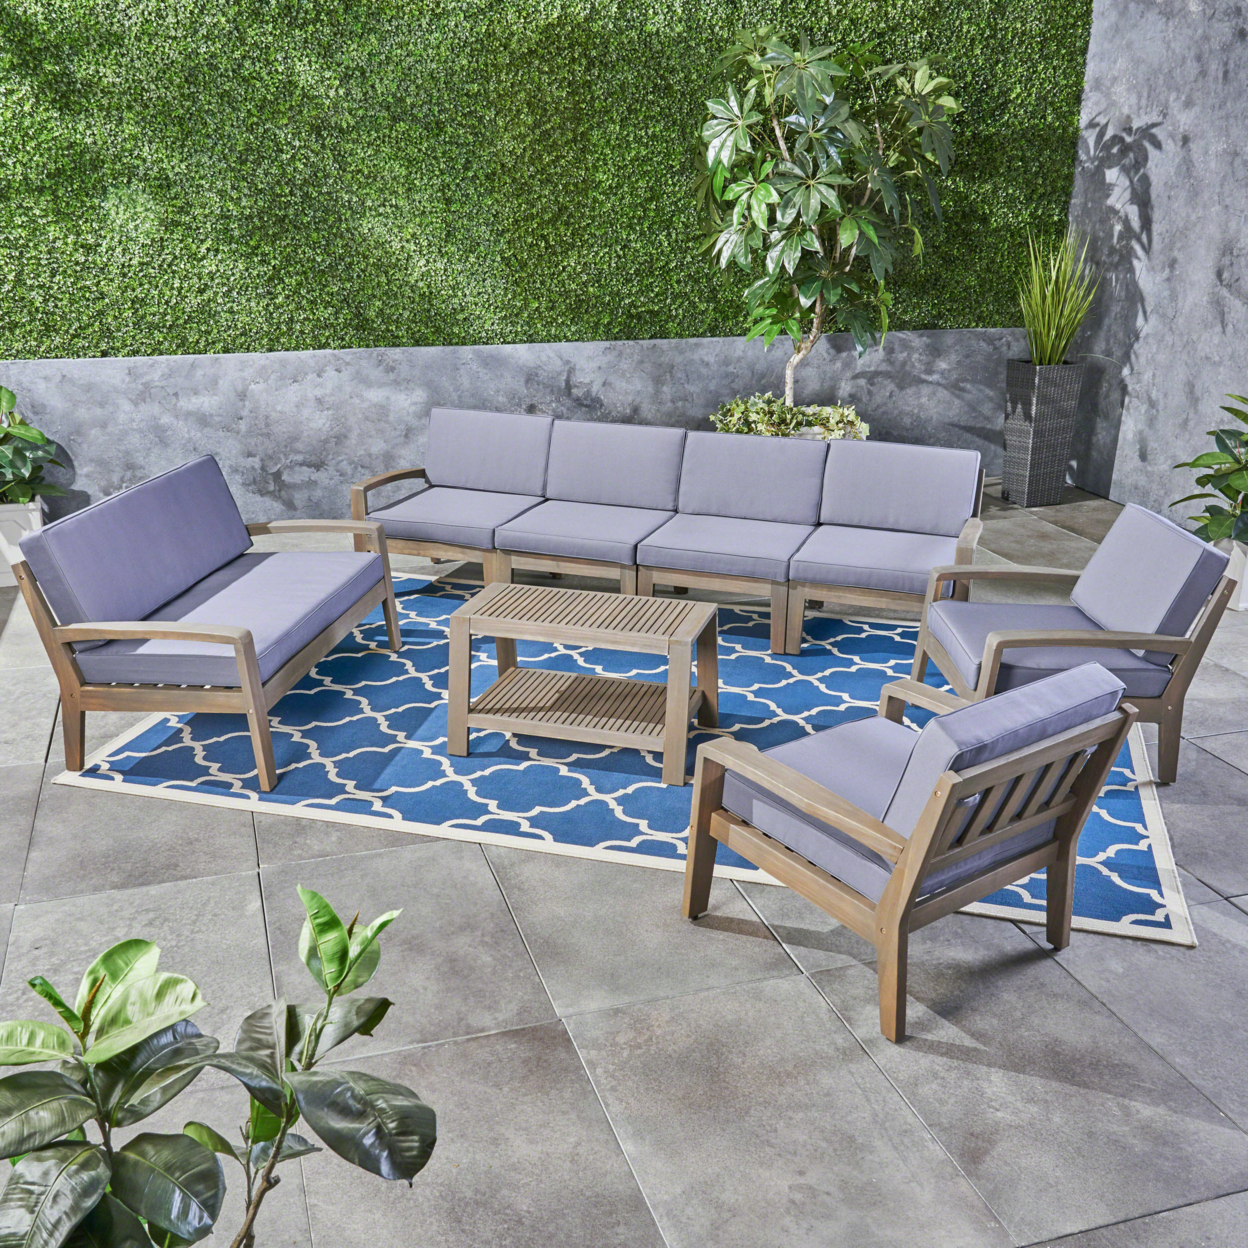 Amaryllis Outdoor Acacia Wood 8 Seater Sectional Chat Set With Coffee Table - Gray / Dark Gray